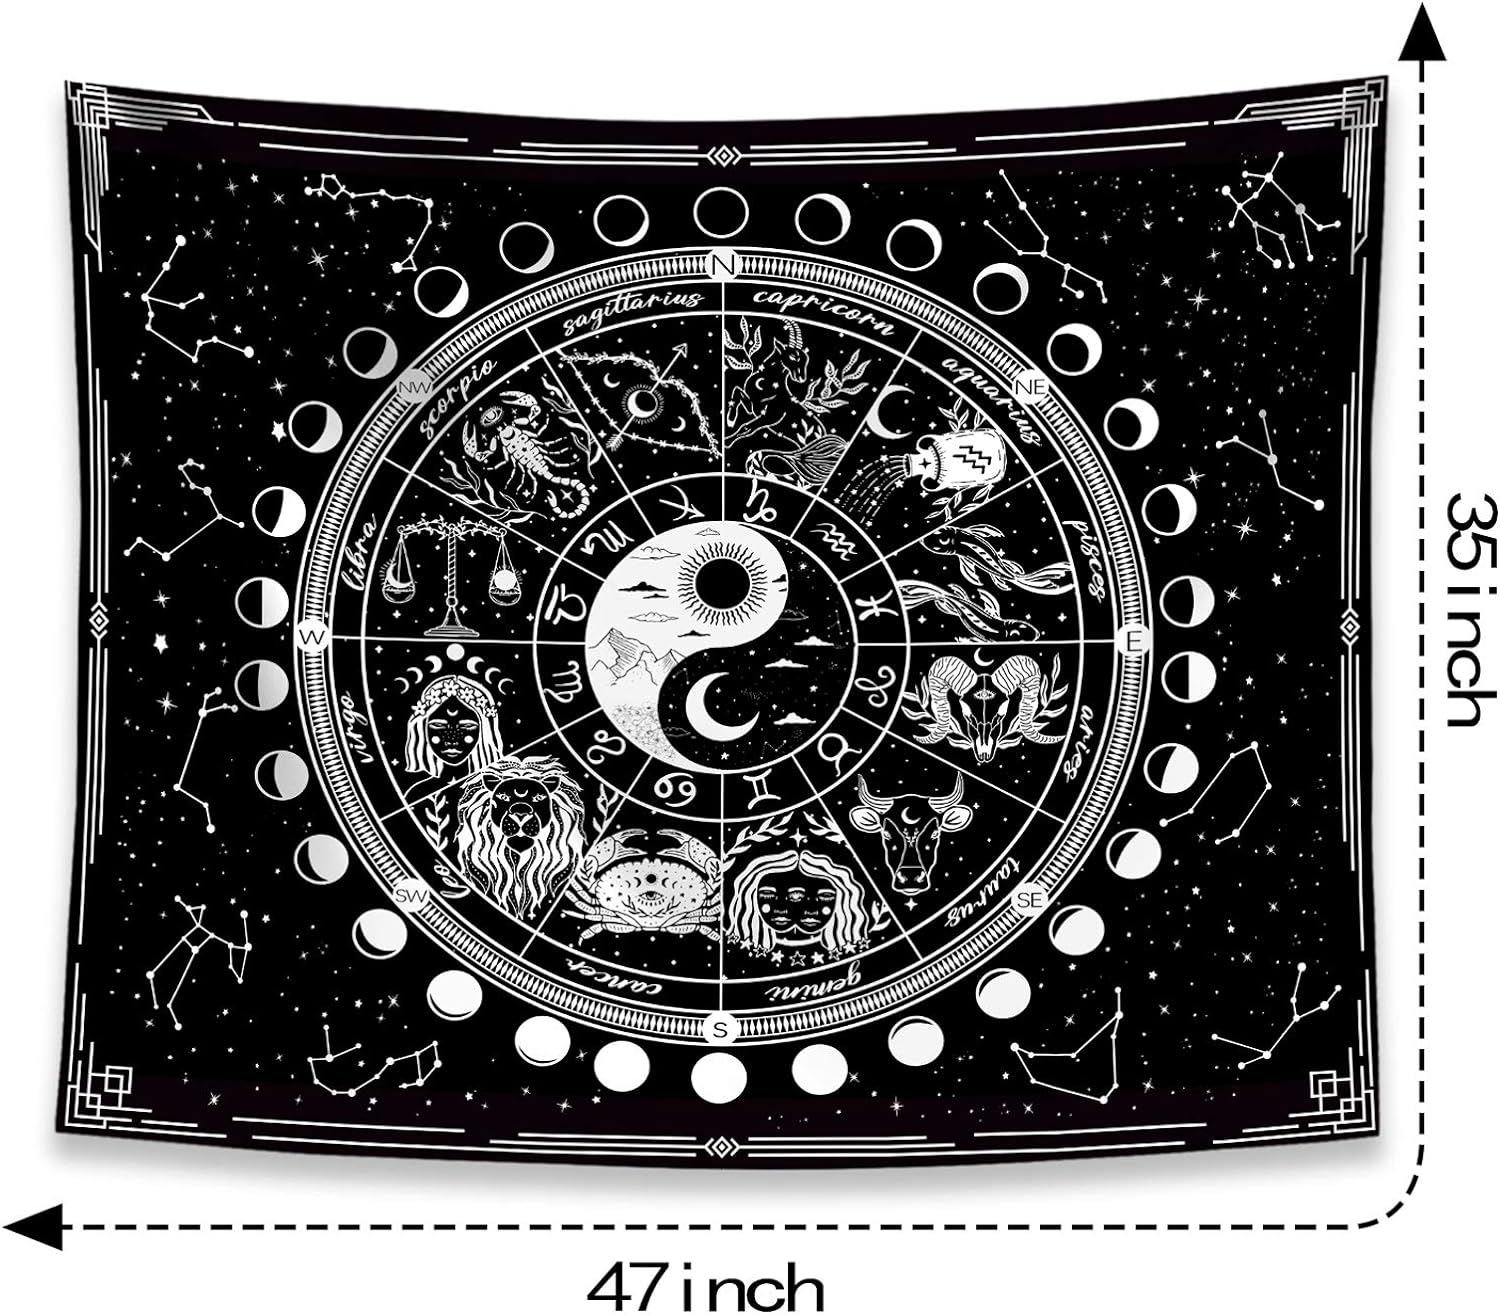 Kanuyee Twelve Constellation Tapestry,Black and White ，Sun and Moon ，Yin and Yang Tapestry Mystic Wall Hanging Tapestry for Home Decor (35x47)